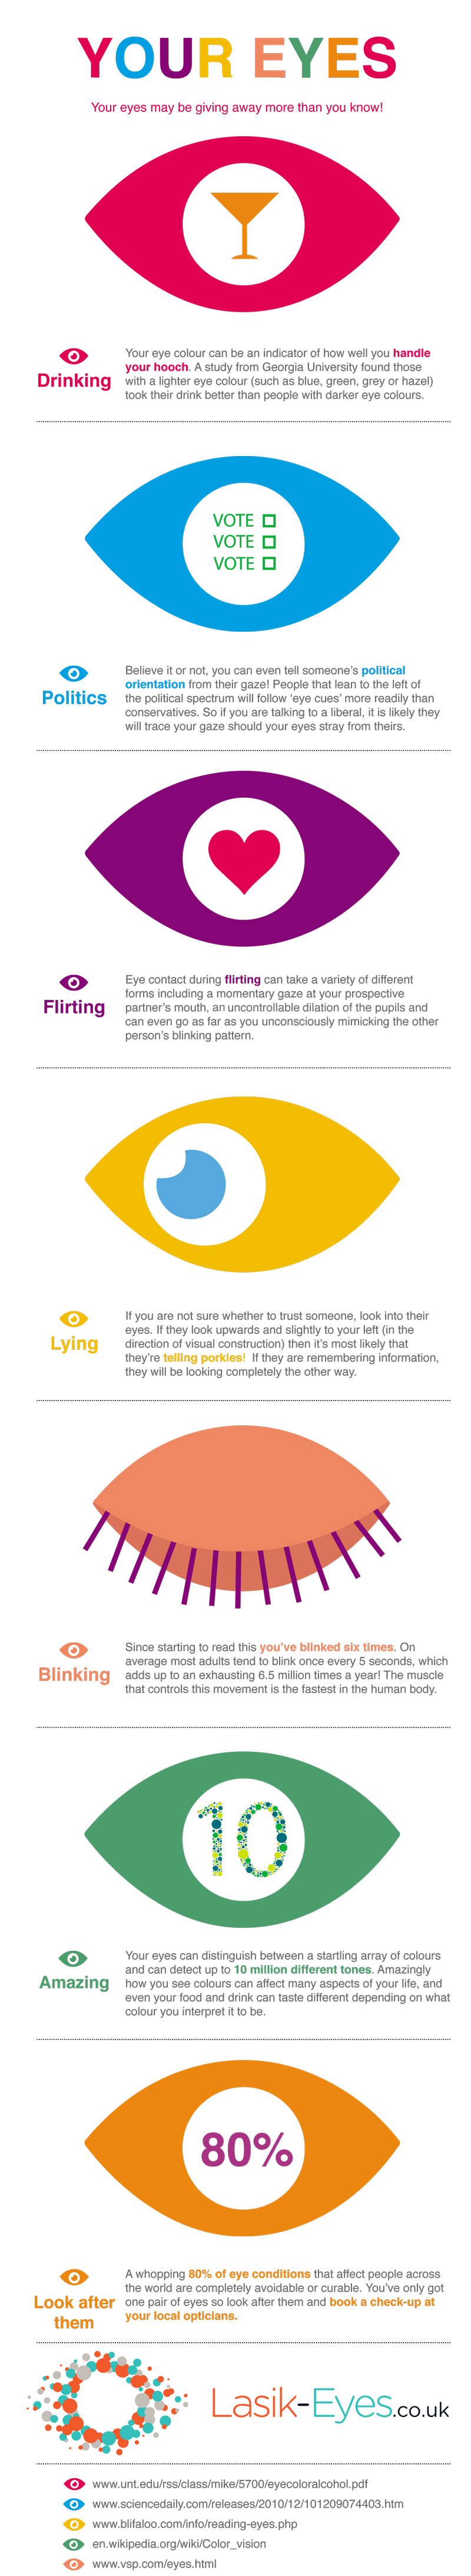 7 Amazing Facts About Your Eyes infographic